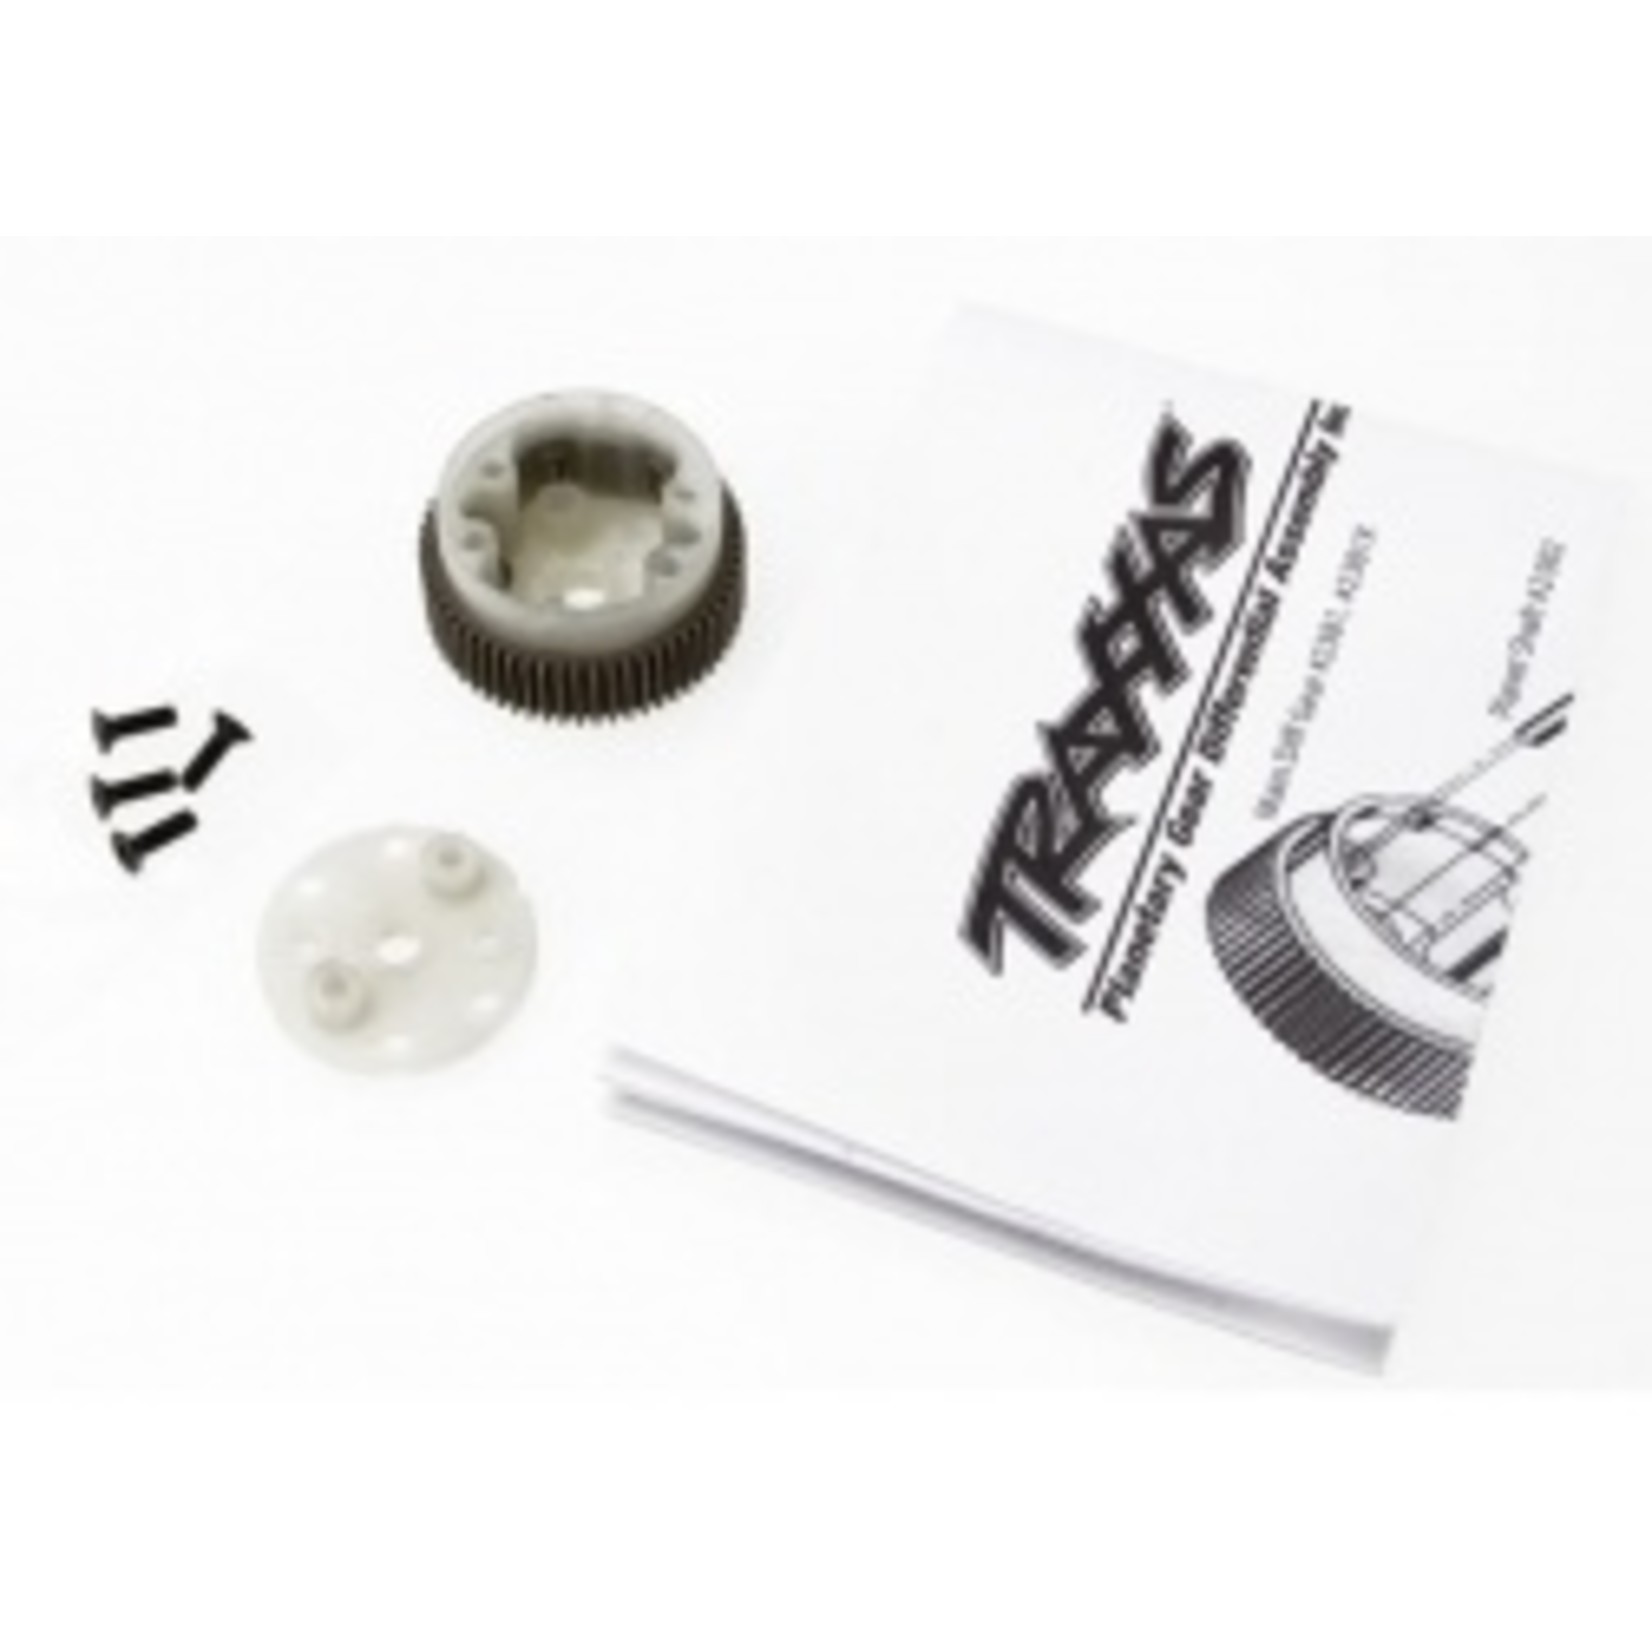 Traxxas Main diff with steel ring gear/ side cover plate/ screws (Bandit®, Stampede®, Rustler®)